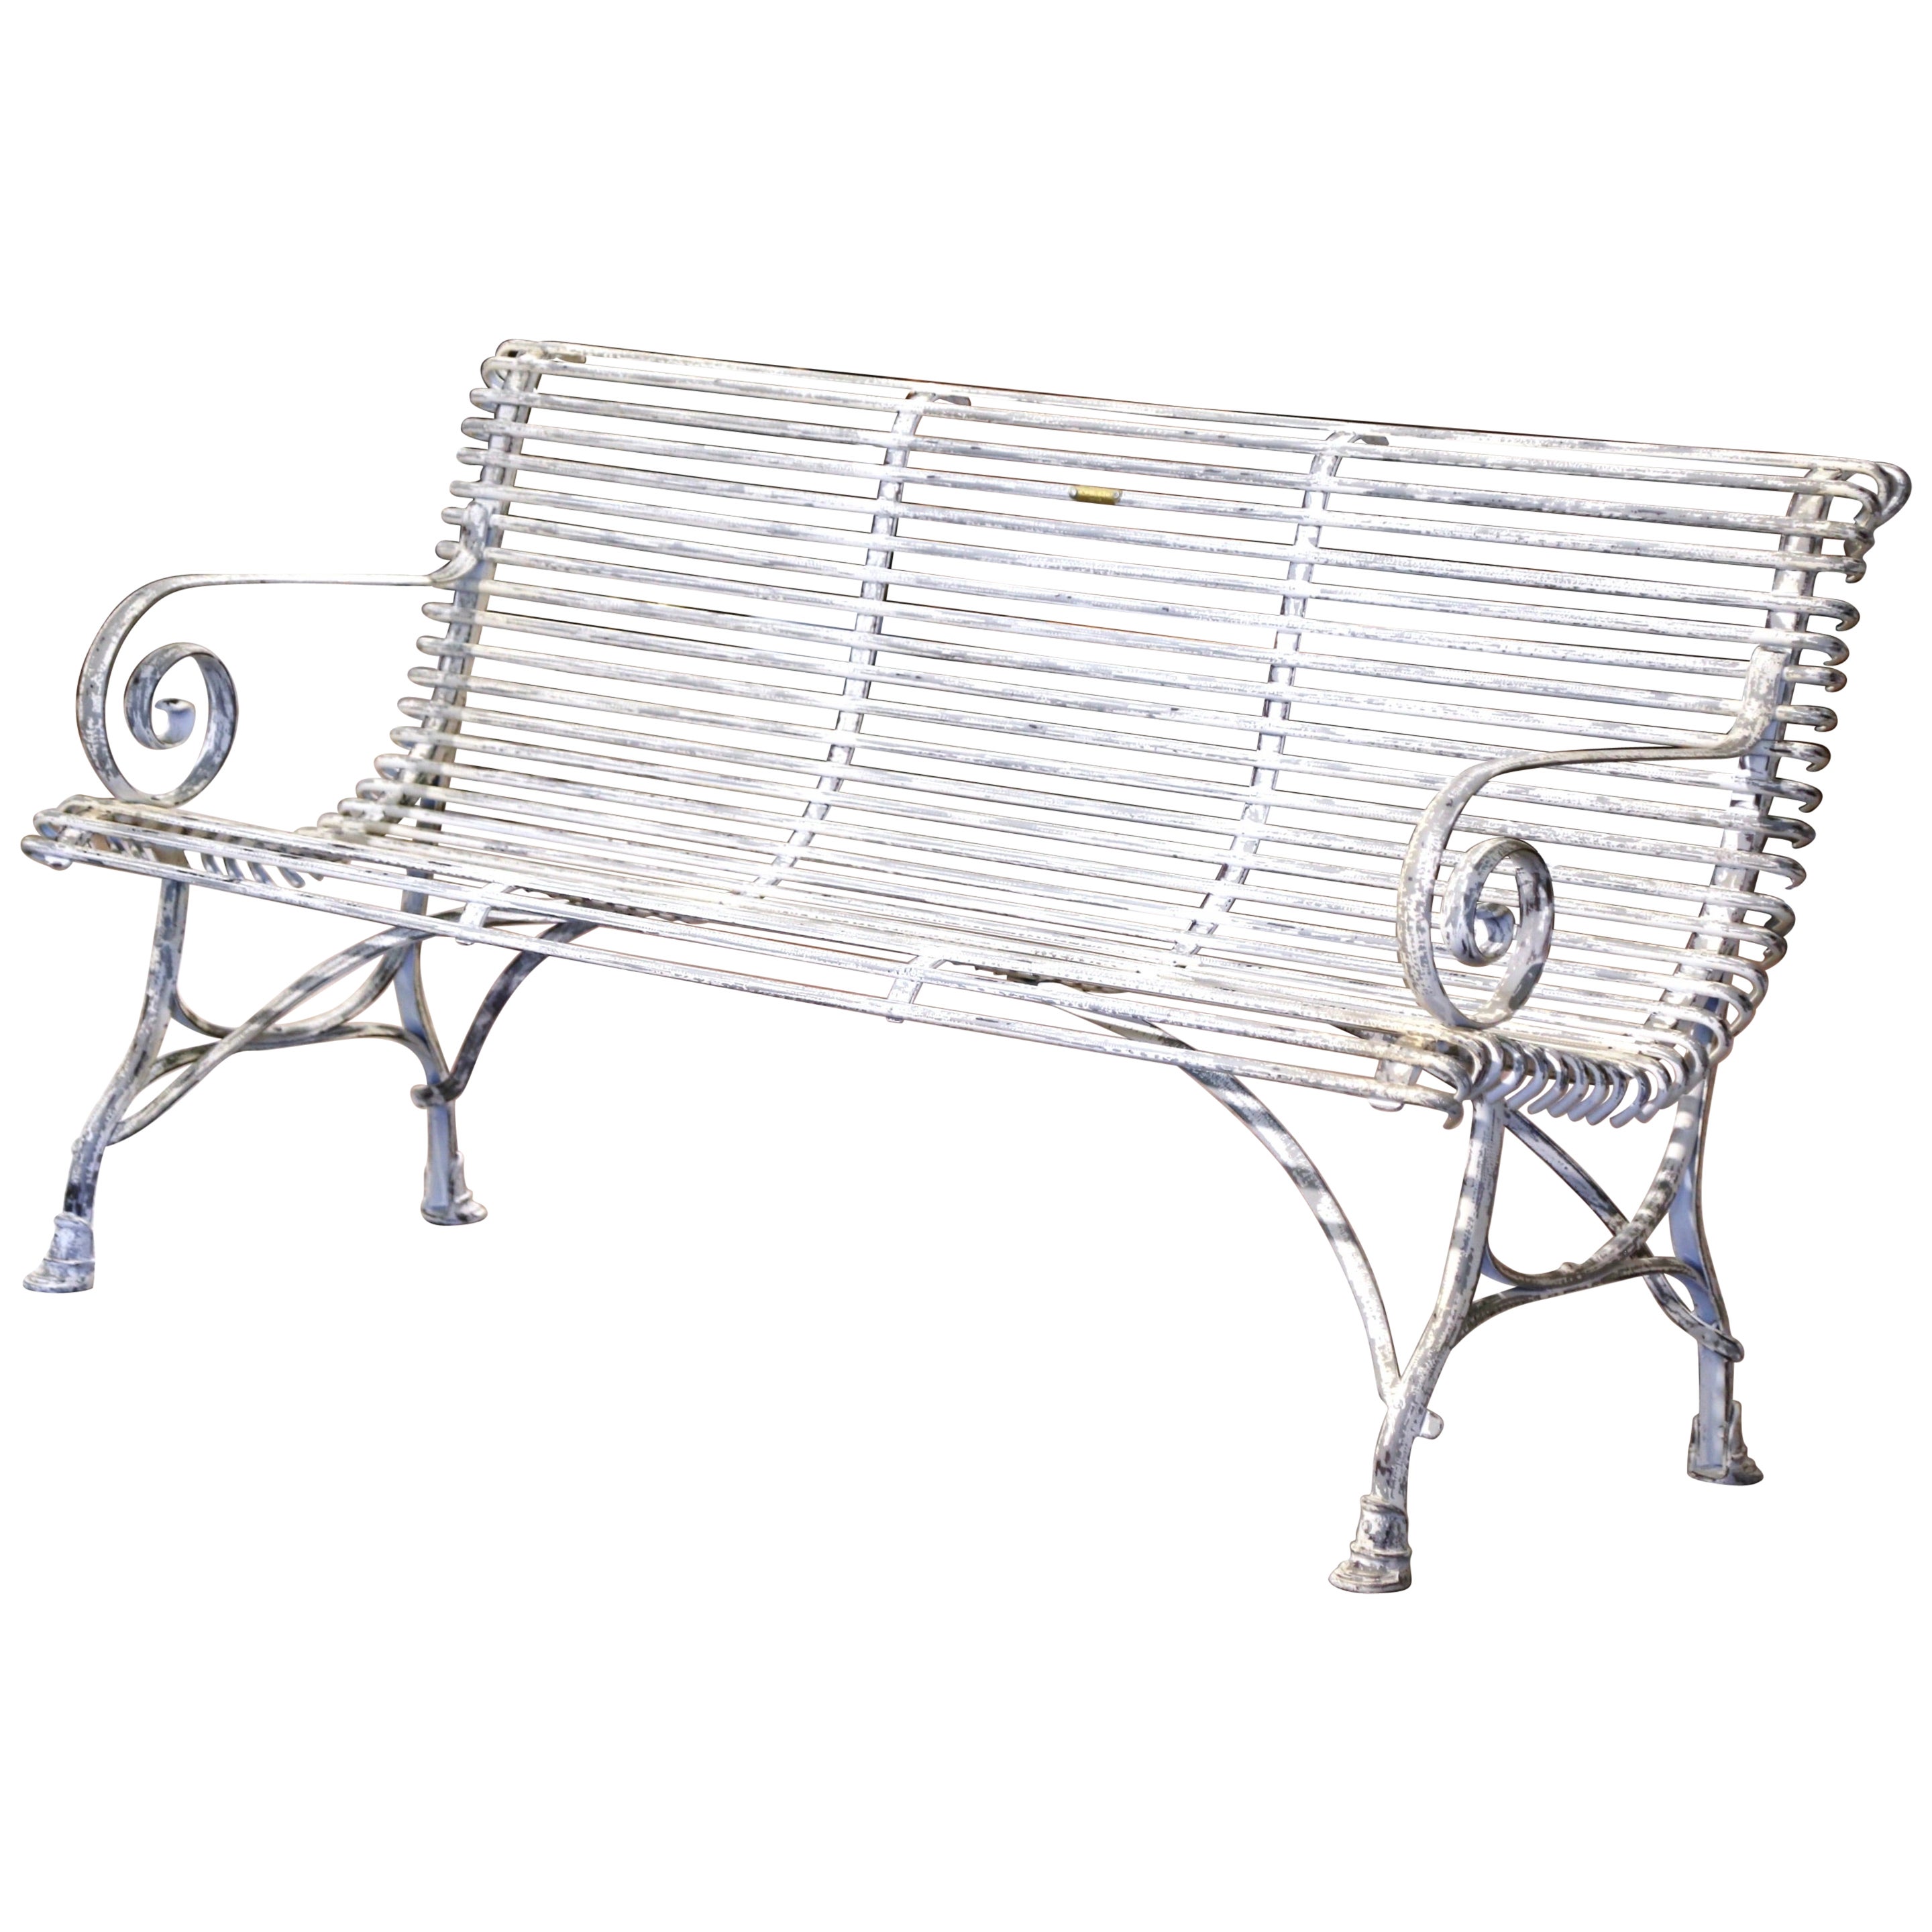 Vintage French Painted Iron Three-Seat Garden Bench Signed Sauveur Arras For Sale